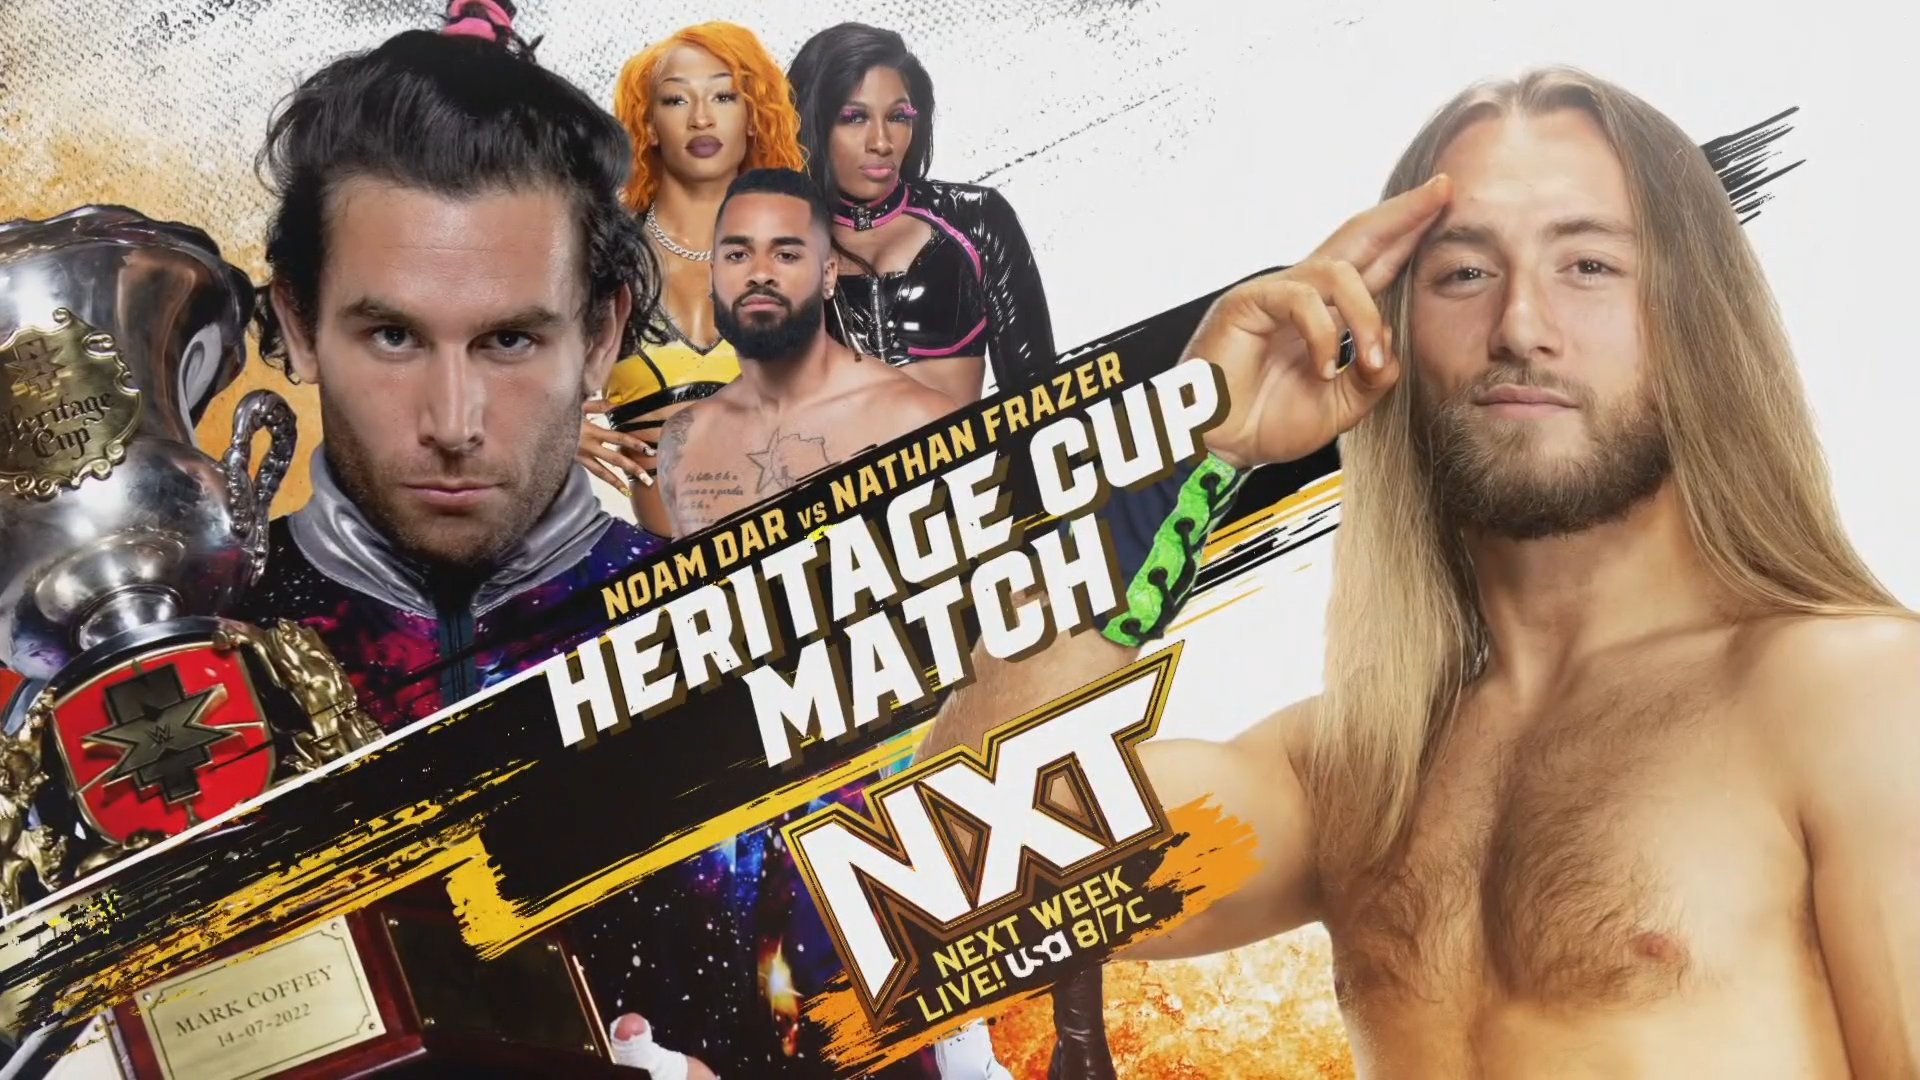 Heritage Cup Match And More Set For Next Week's NXT